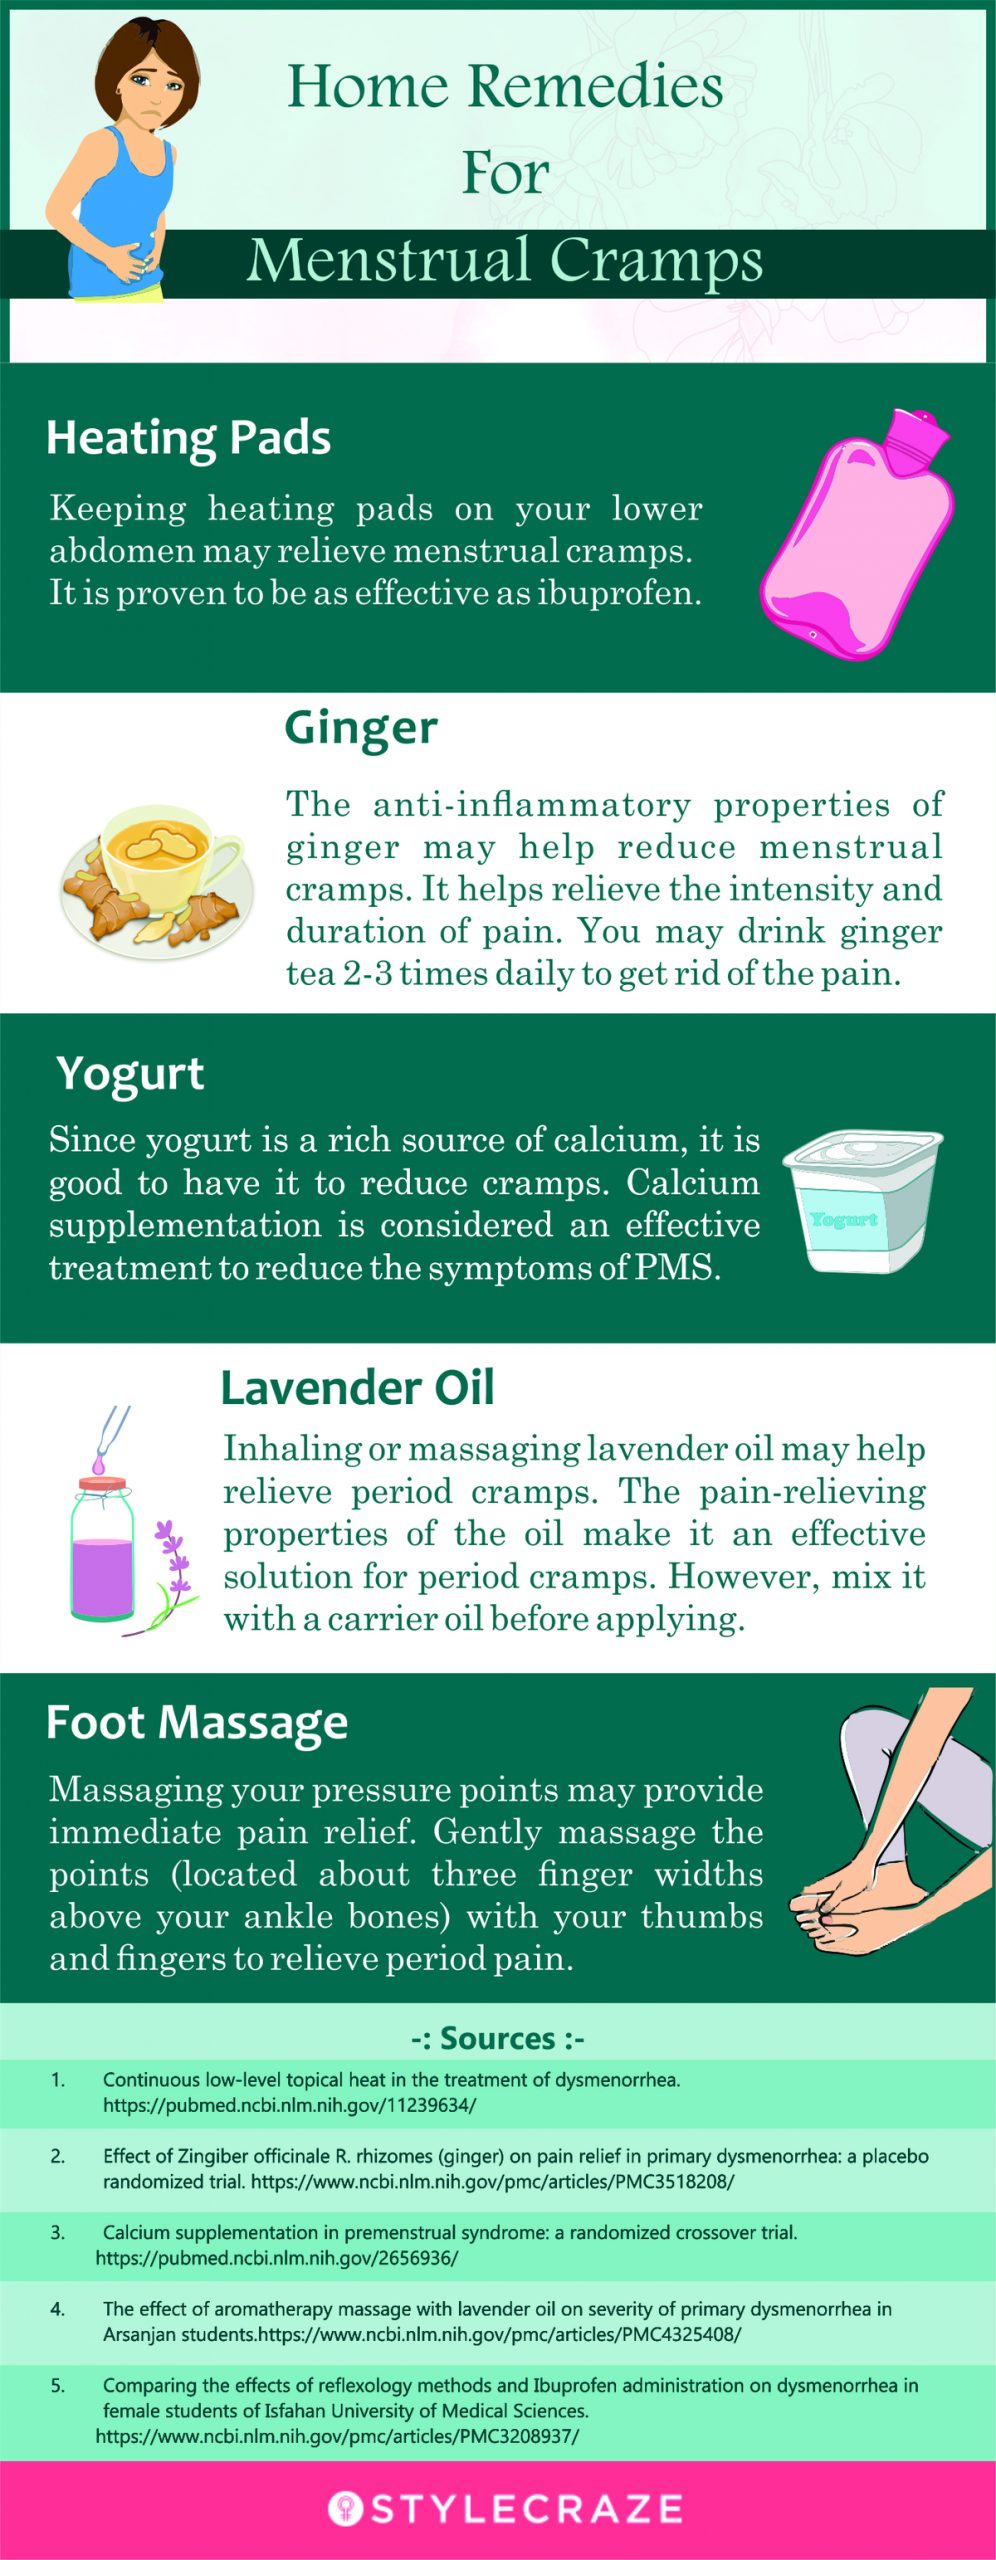 chome remedies for menstrual cramps (infographic)